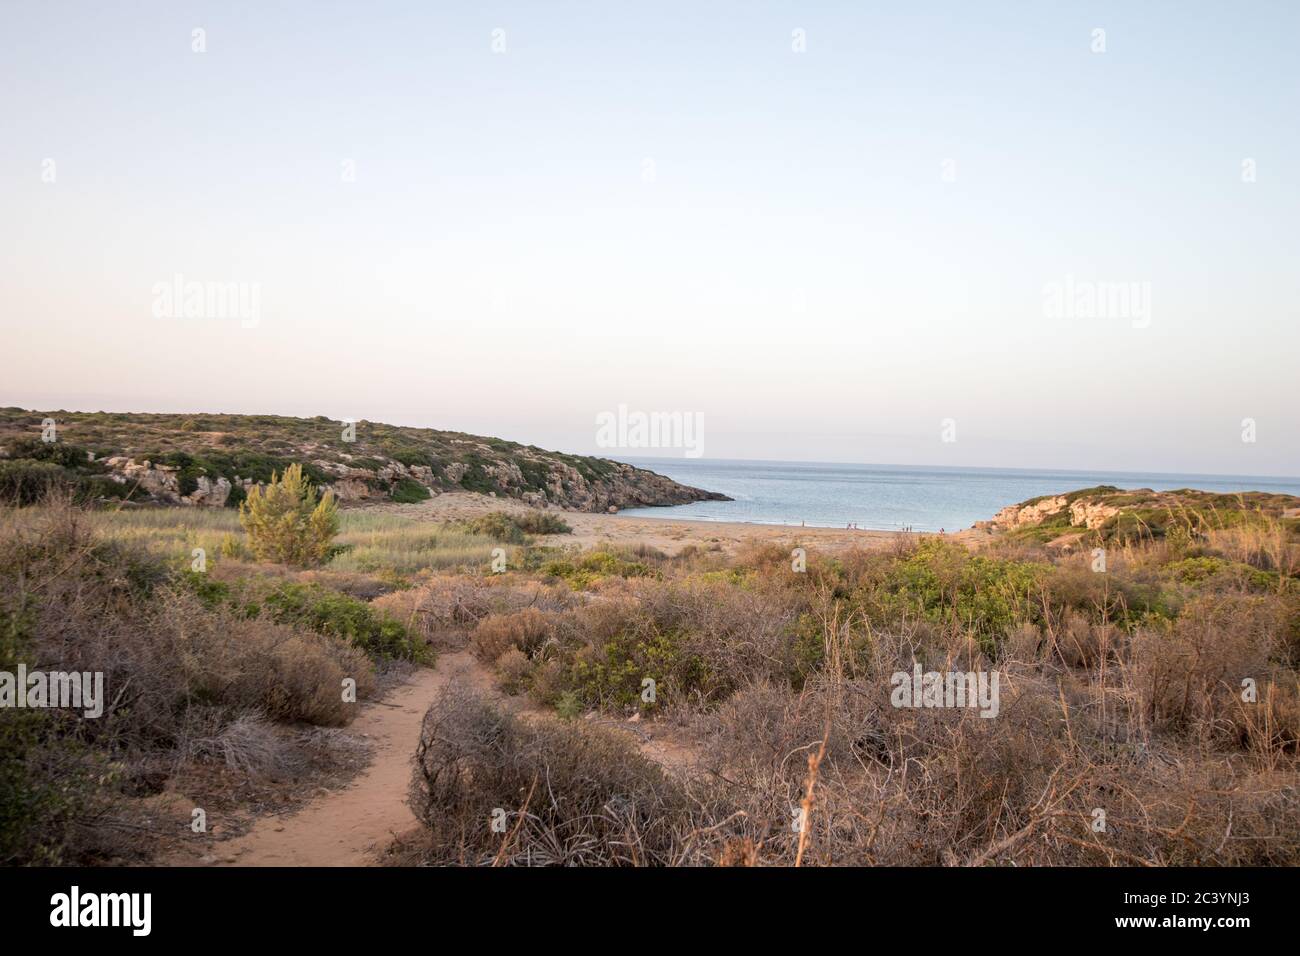 Calamosche beach at sunset view from hill with sand path Stock Photo